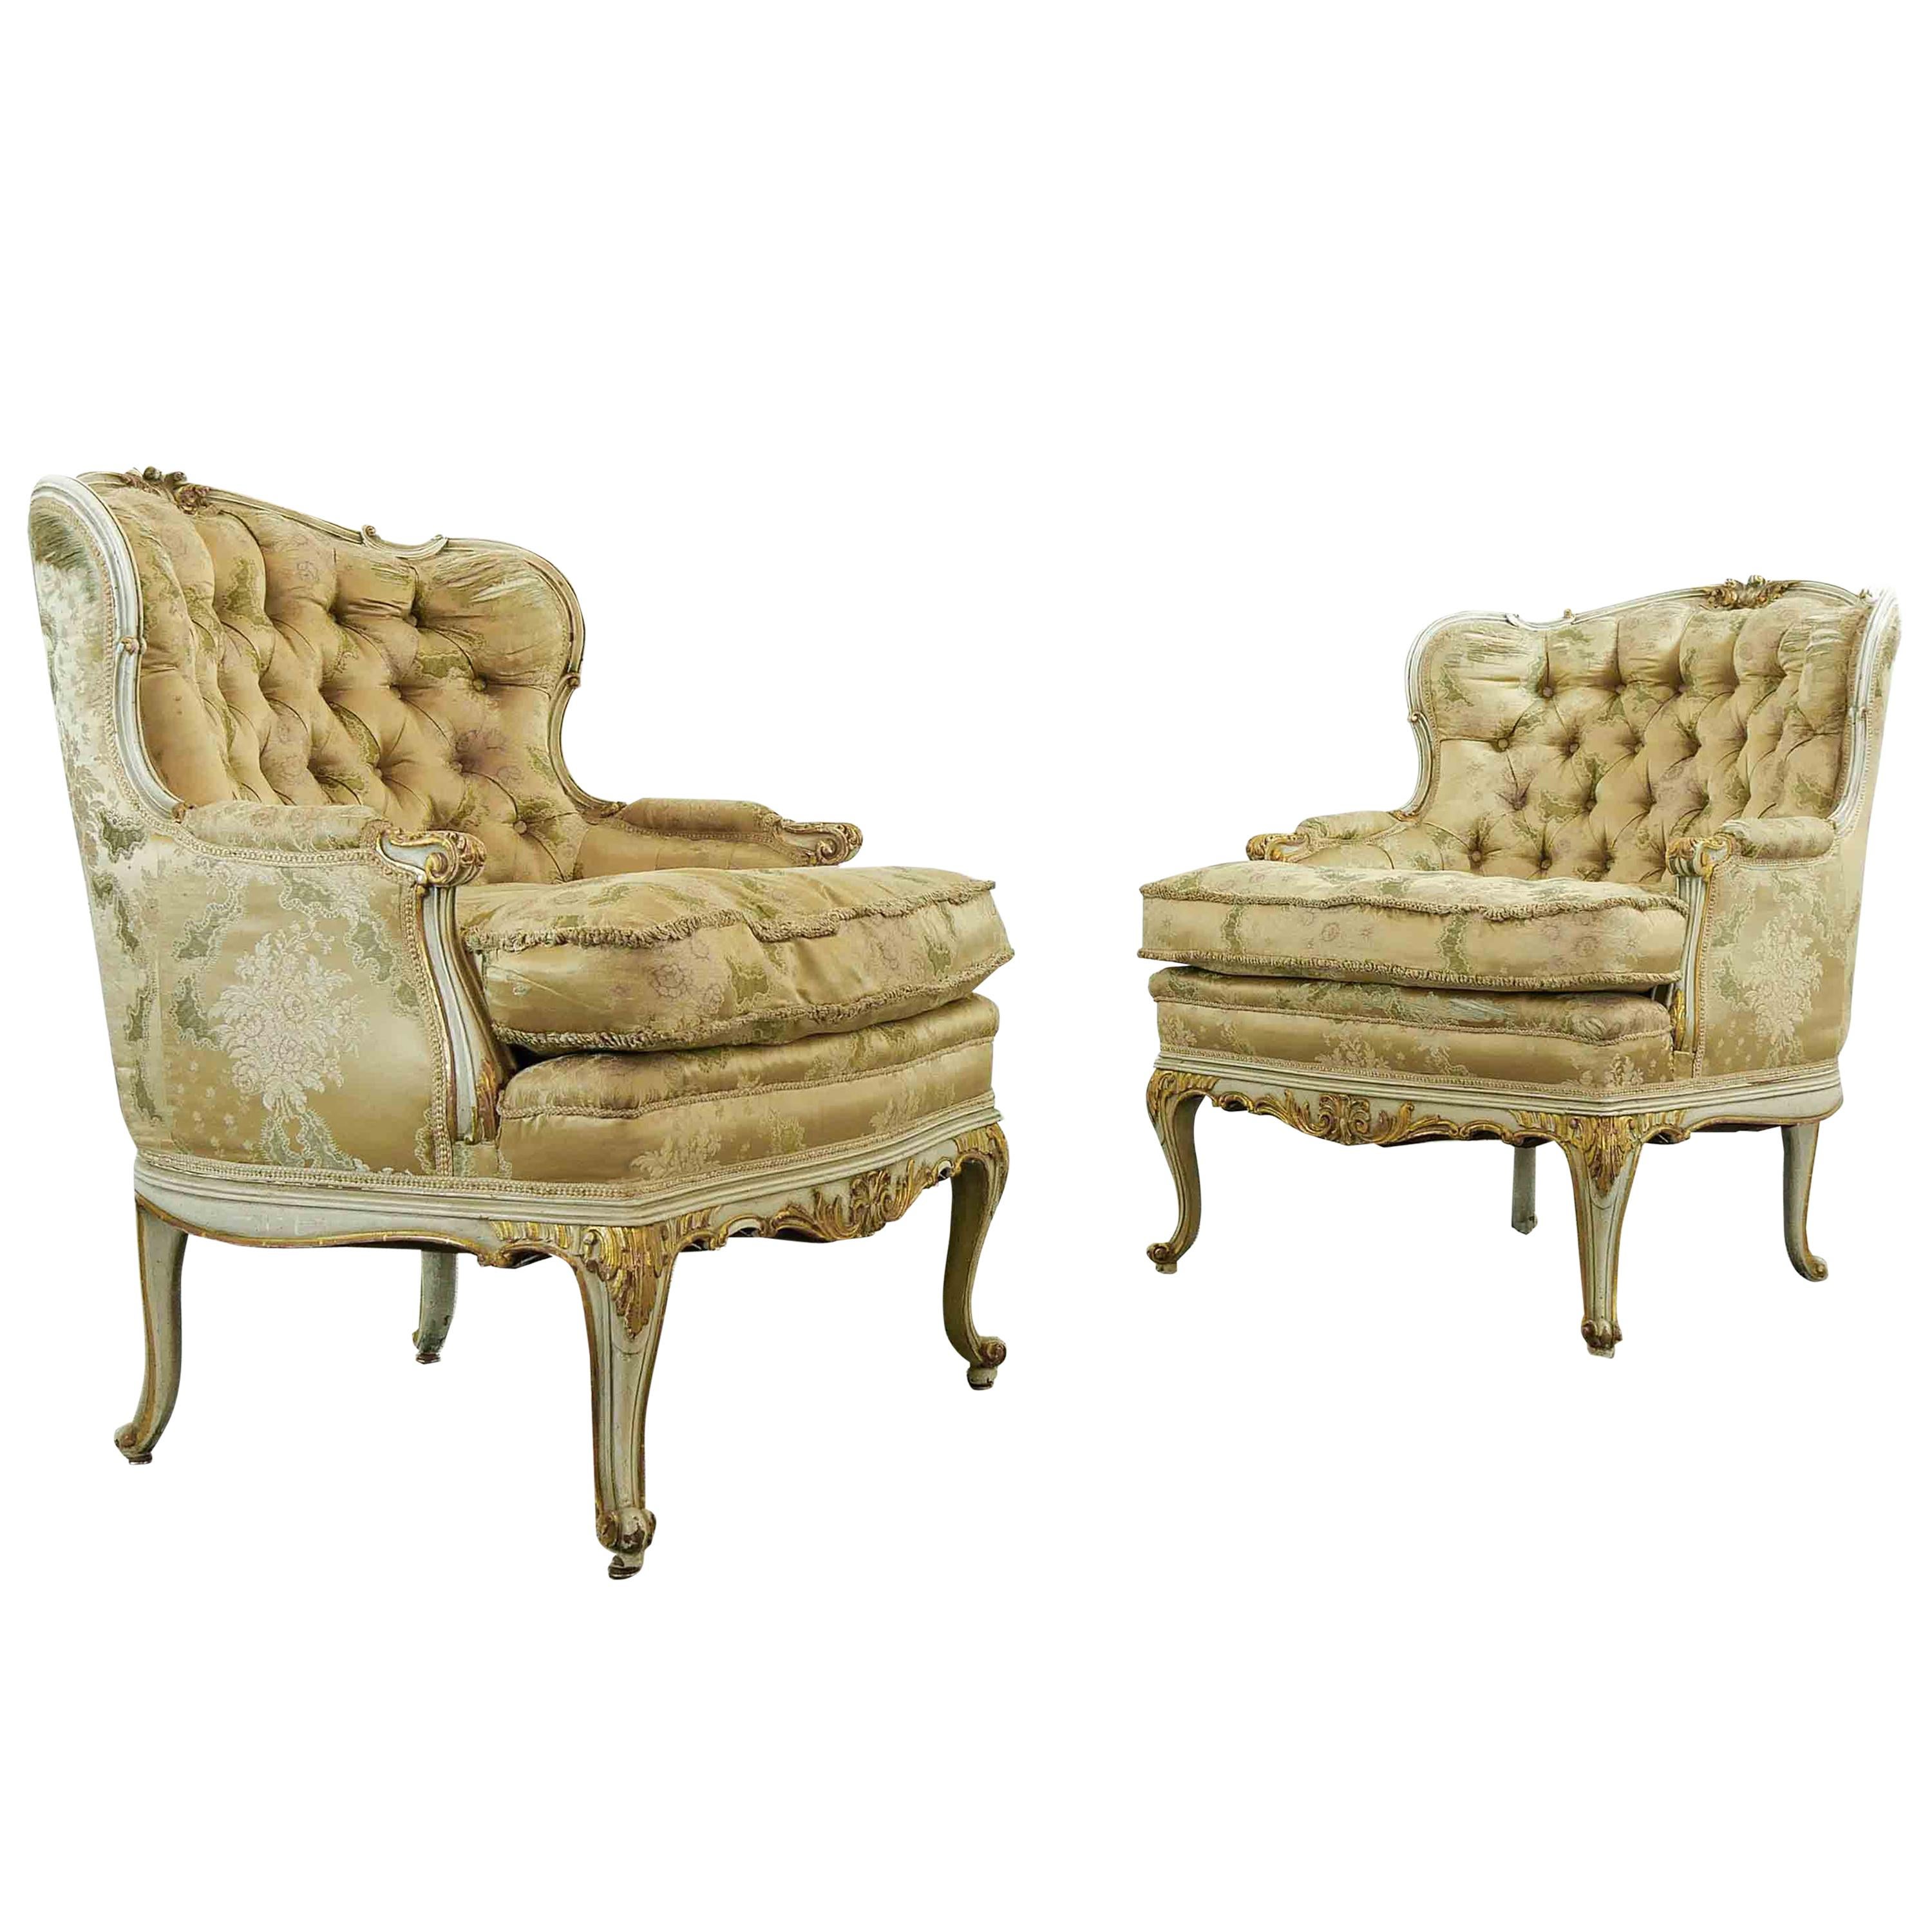 Pair of Wingback Armchairs Finely Carved in Baroque-Chippendale Style